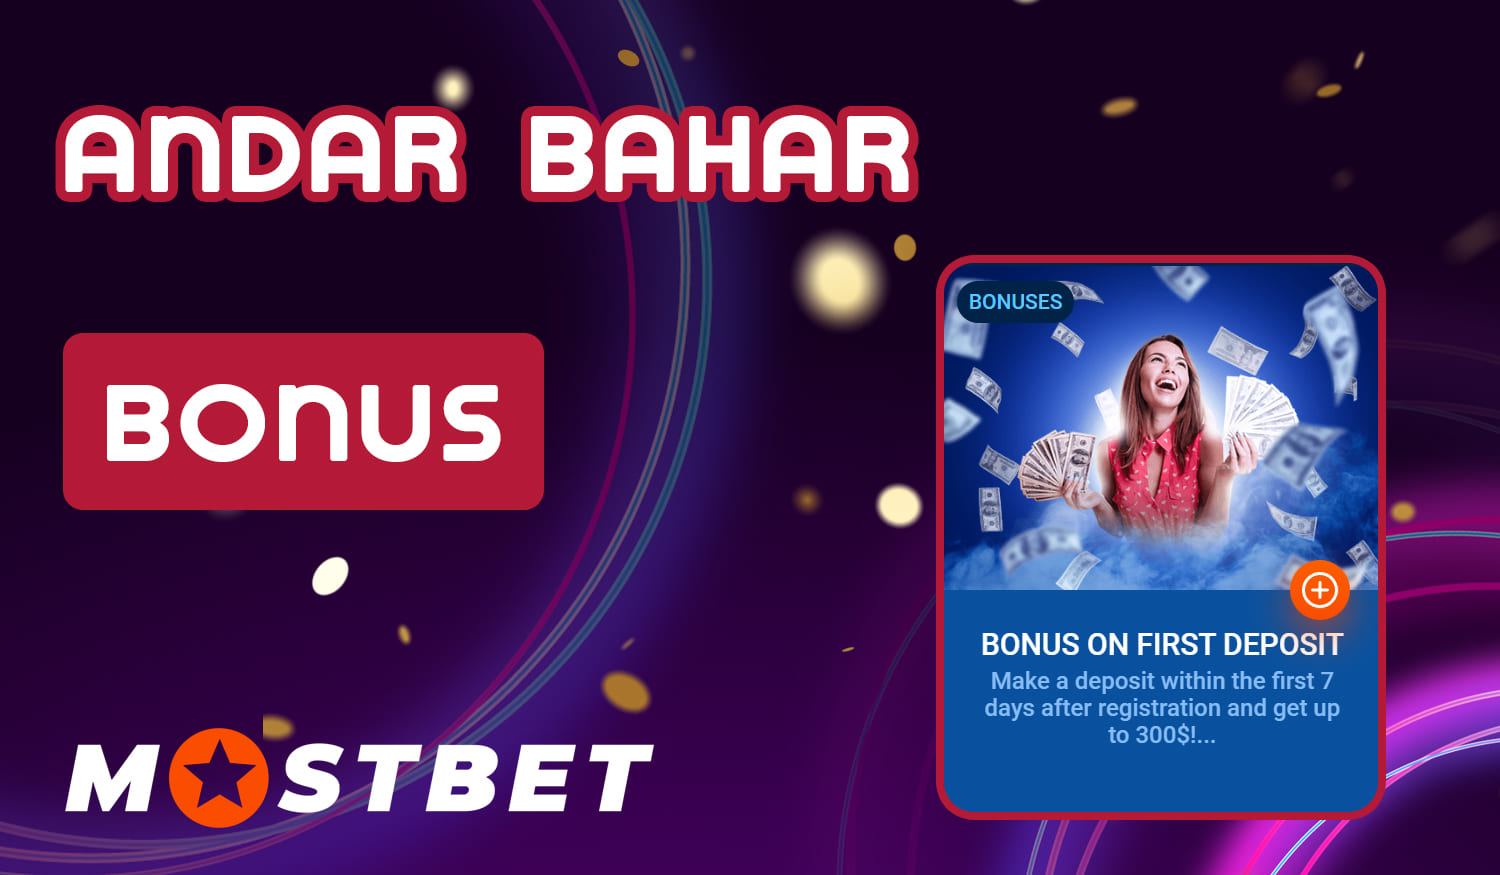 Bonuses available to Andar Bahar fans on Mostbet